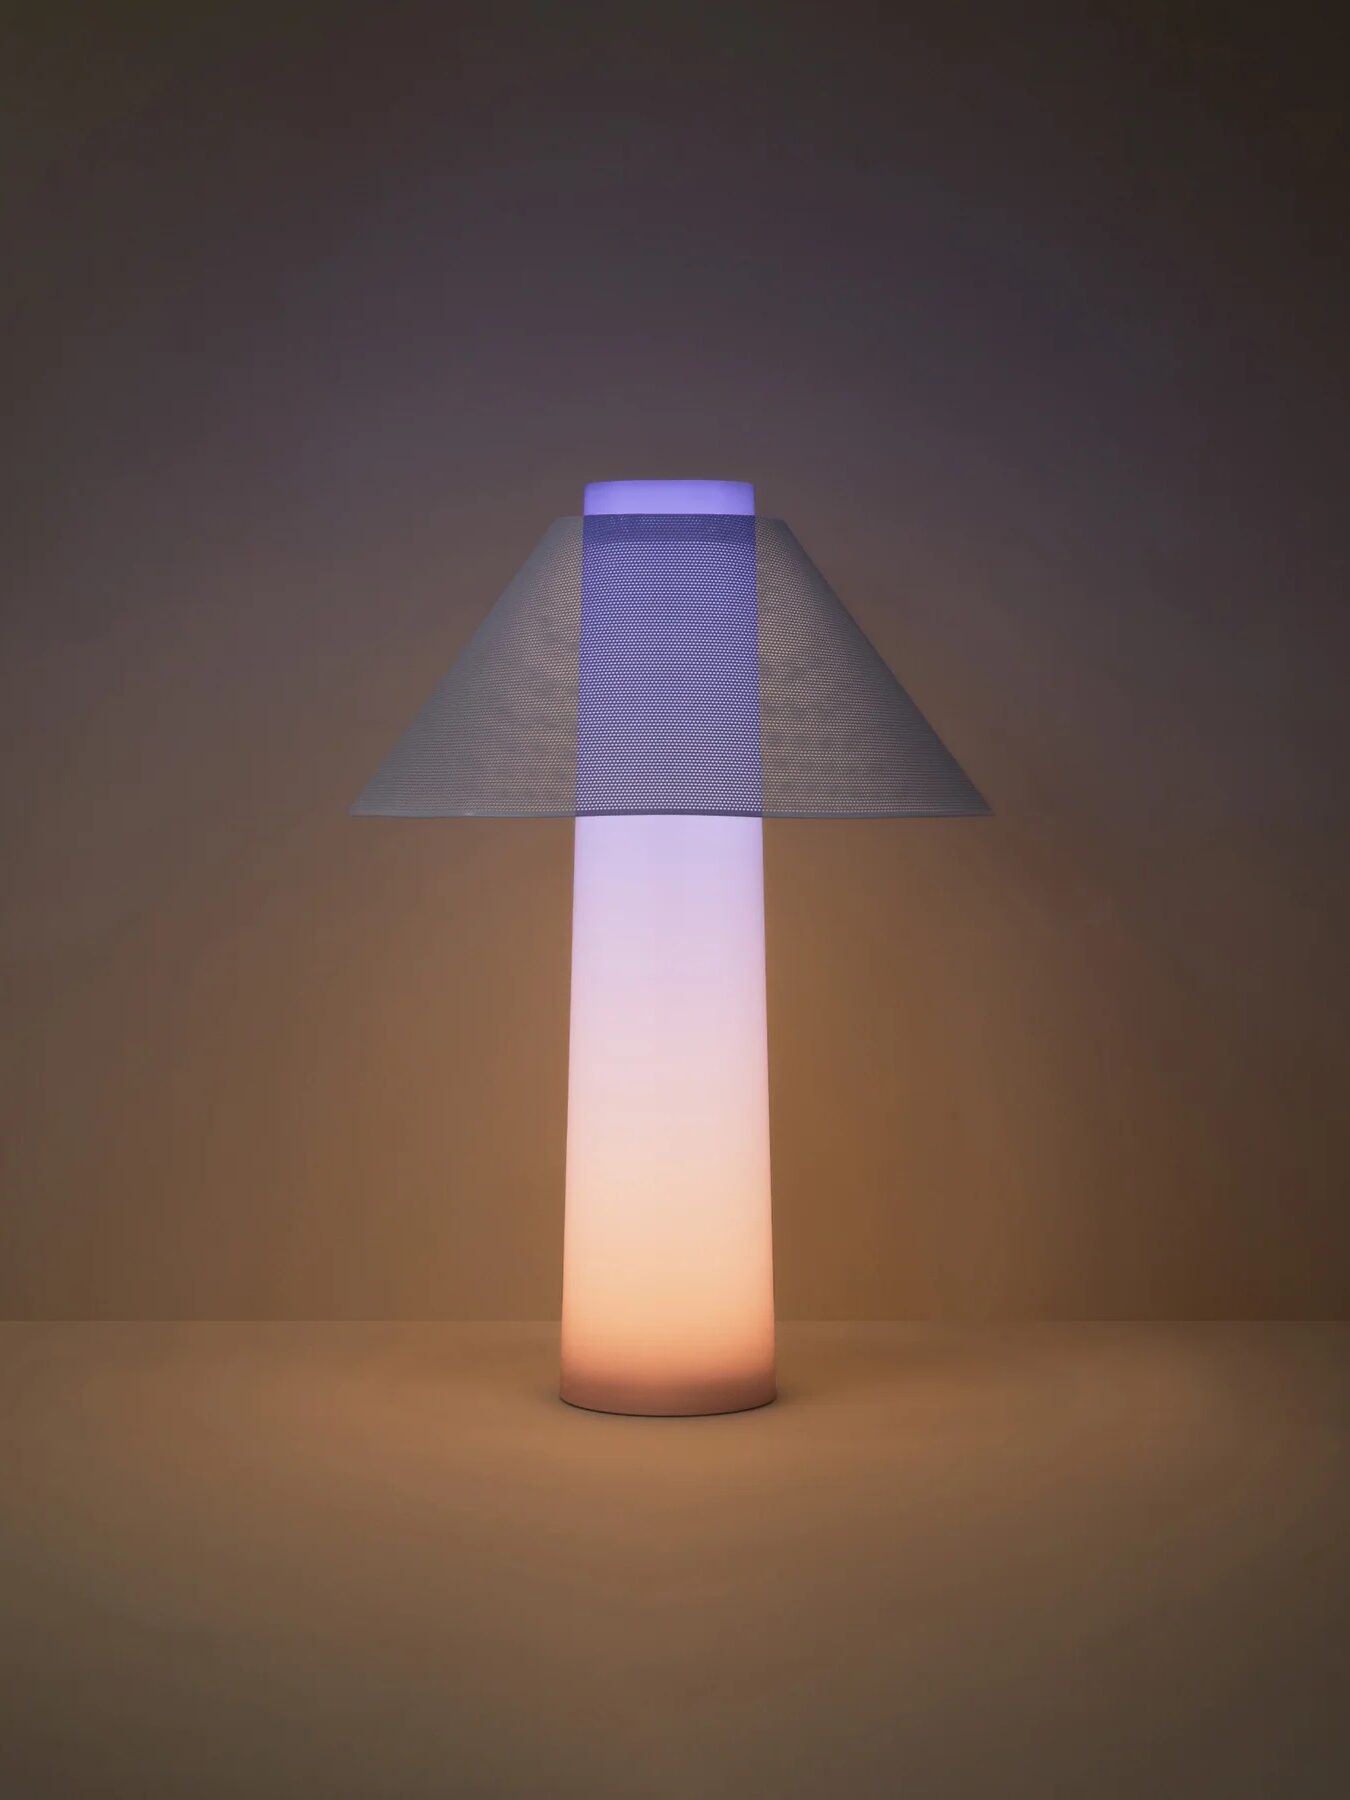 Loftie lamp in a soft light mode sits on the table, its base a warm light and the top a blue light.